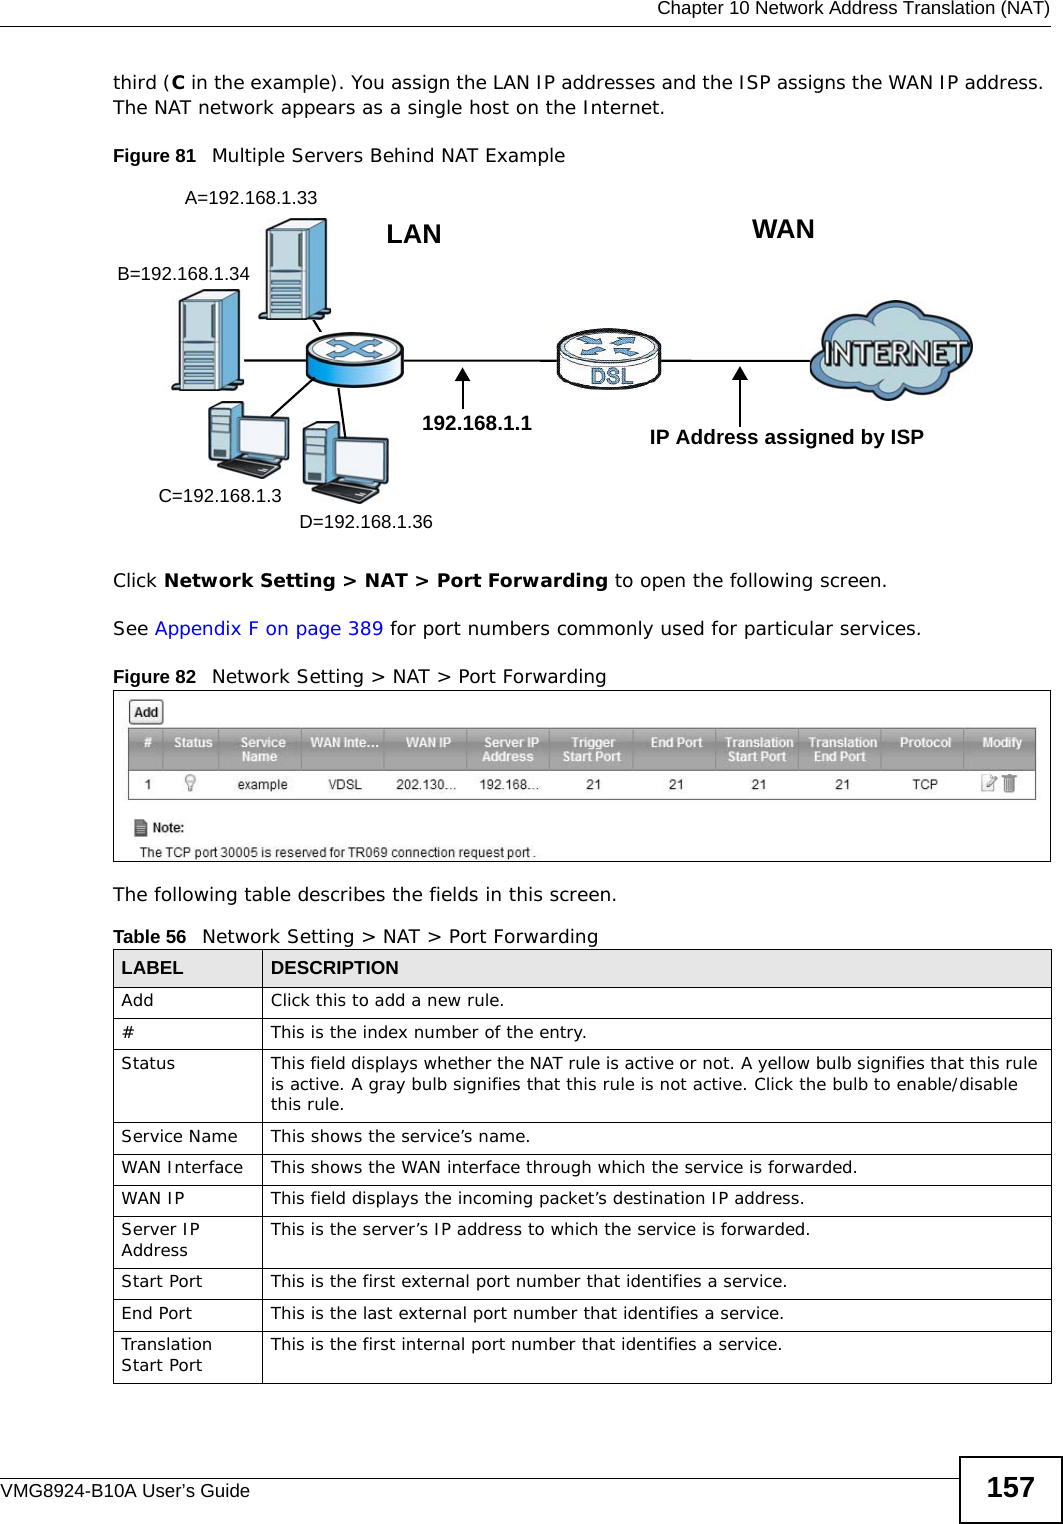  Chapter 10 Network Address Translation (NAT)VMG8924-B10A User’s Guide 157third (C in the example). You assign the LAN IP addresses and the ISP assigns the WAN IP address. The NAT network appears as a single host on the Internet.Figure 81   Multiple Servers Behind NAT ExampleClick Network Setting &gt; NAT &gt; Port Forwarding to open the following screen.See Appendix F on page 389 for port numbers commonly used for particular services. Figure 82   Network Setting &gt; NAT &gt; Port ForwardingThe following table describes the fields in this screen. Table 56   Network Setting &gt; NAT &gt; Port ForwardingLABEL DESCRIPTIONAdd Click this to add a new rule.#This is the index number of the entry.Status This field displays whether the NAT rule is active or not. A yellow bulb signifies that this rule is active. A gray bulb signifies that this rule is not active. Click the bulb to enable/disable this rule.Service Name This shows the service’s name.WAN Interface This shows the WAN interface through which the service is forwarded.WAN IP This field displays the incoming packet’s destination IP address.Server IP Address This is the server’s IP address to which the service is forwarded.Start Port  This is the first external port number that identifies a service.End Port  This is the last external port number that identifies a service.Translation Start Port  This is the first internal port number that identifies a service.A=192.168.1.33D=192.168.1.36C=192.168.1.3B=192.168.1.34WANLAN192.168.1.1 IP Address assigned by ISP